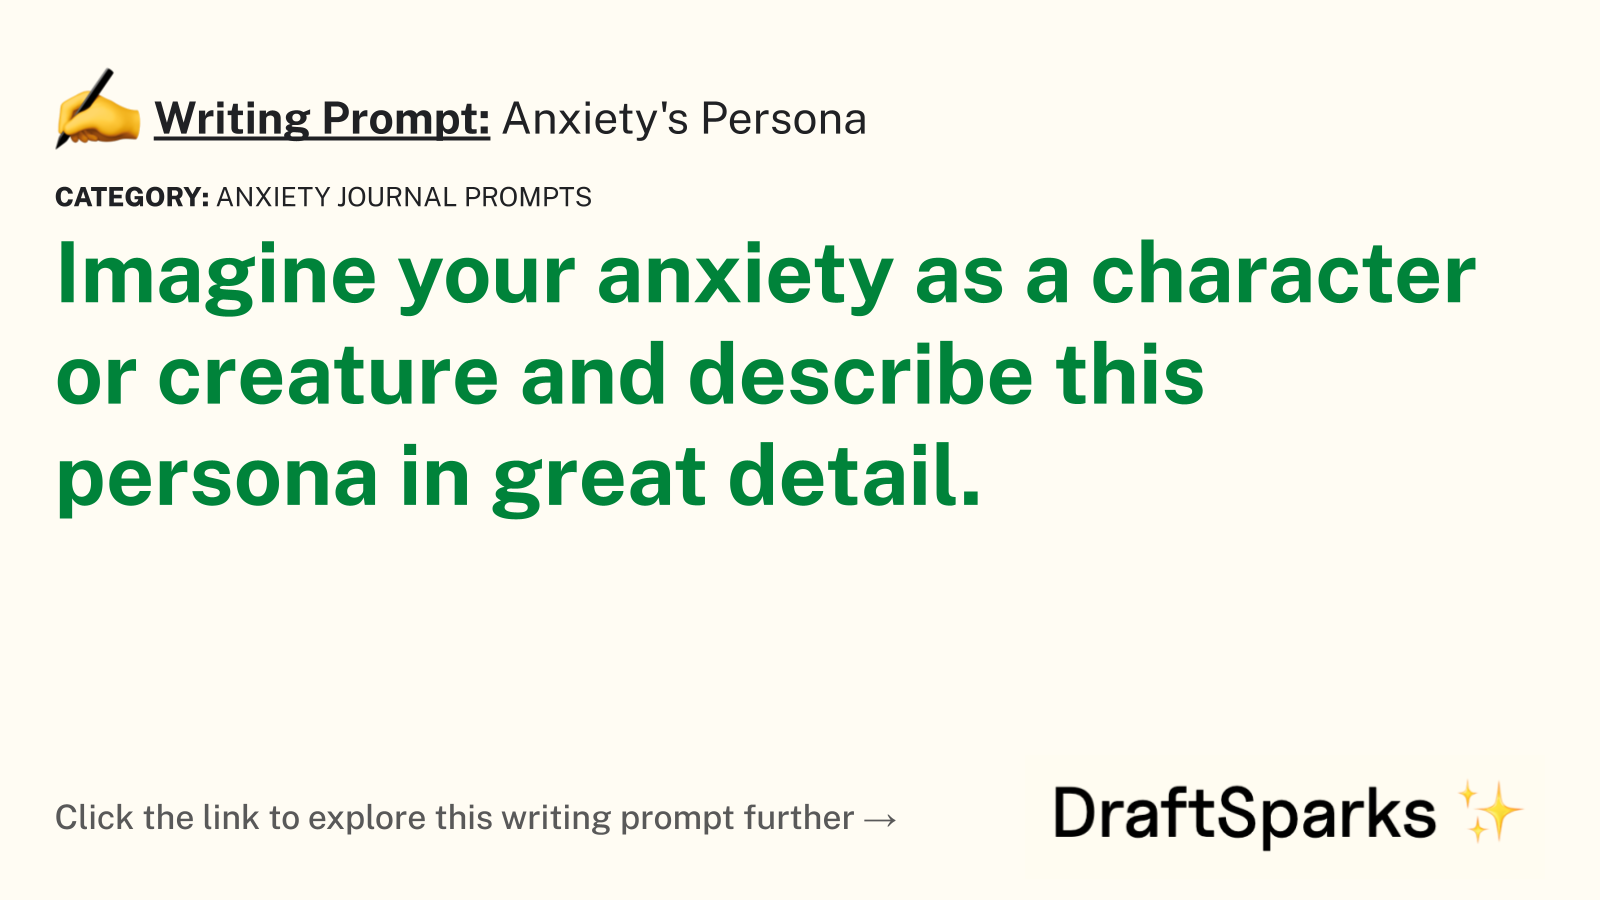 Anxiety’s Persona